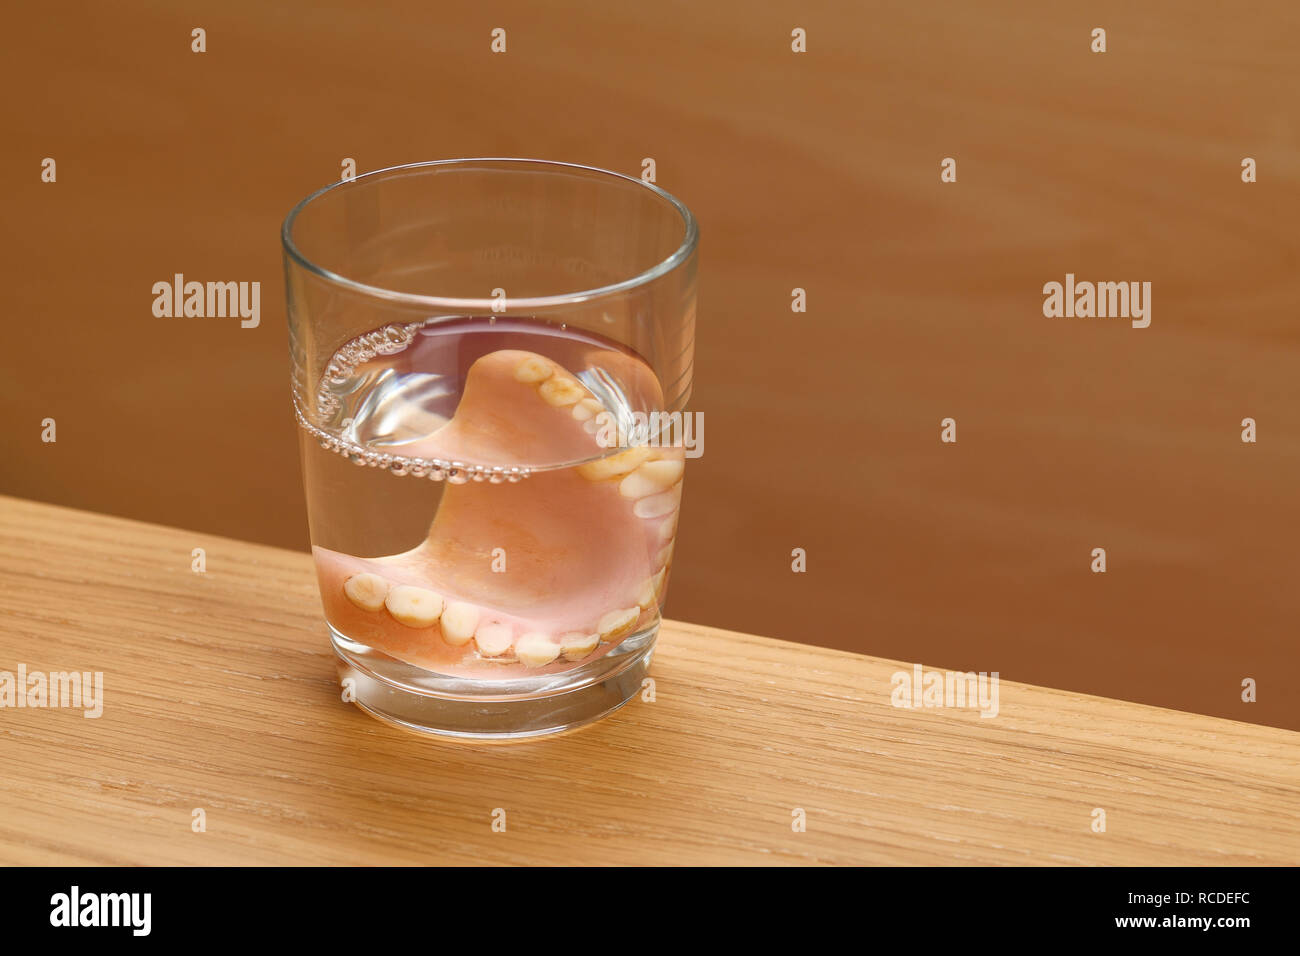 A set of false teeth in a glass of water Stock Photo